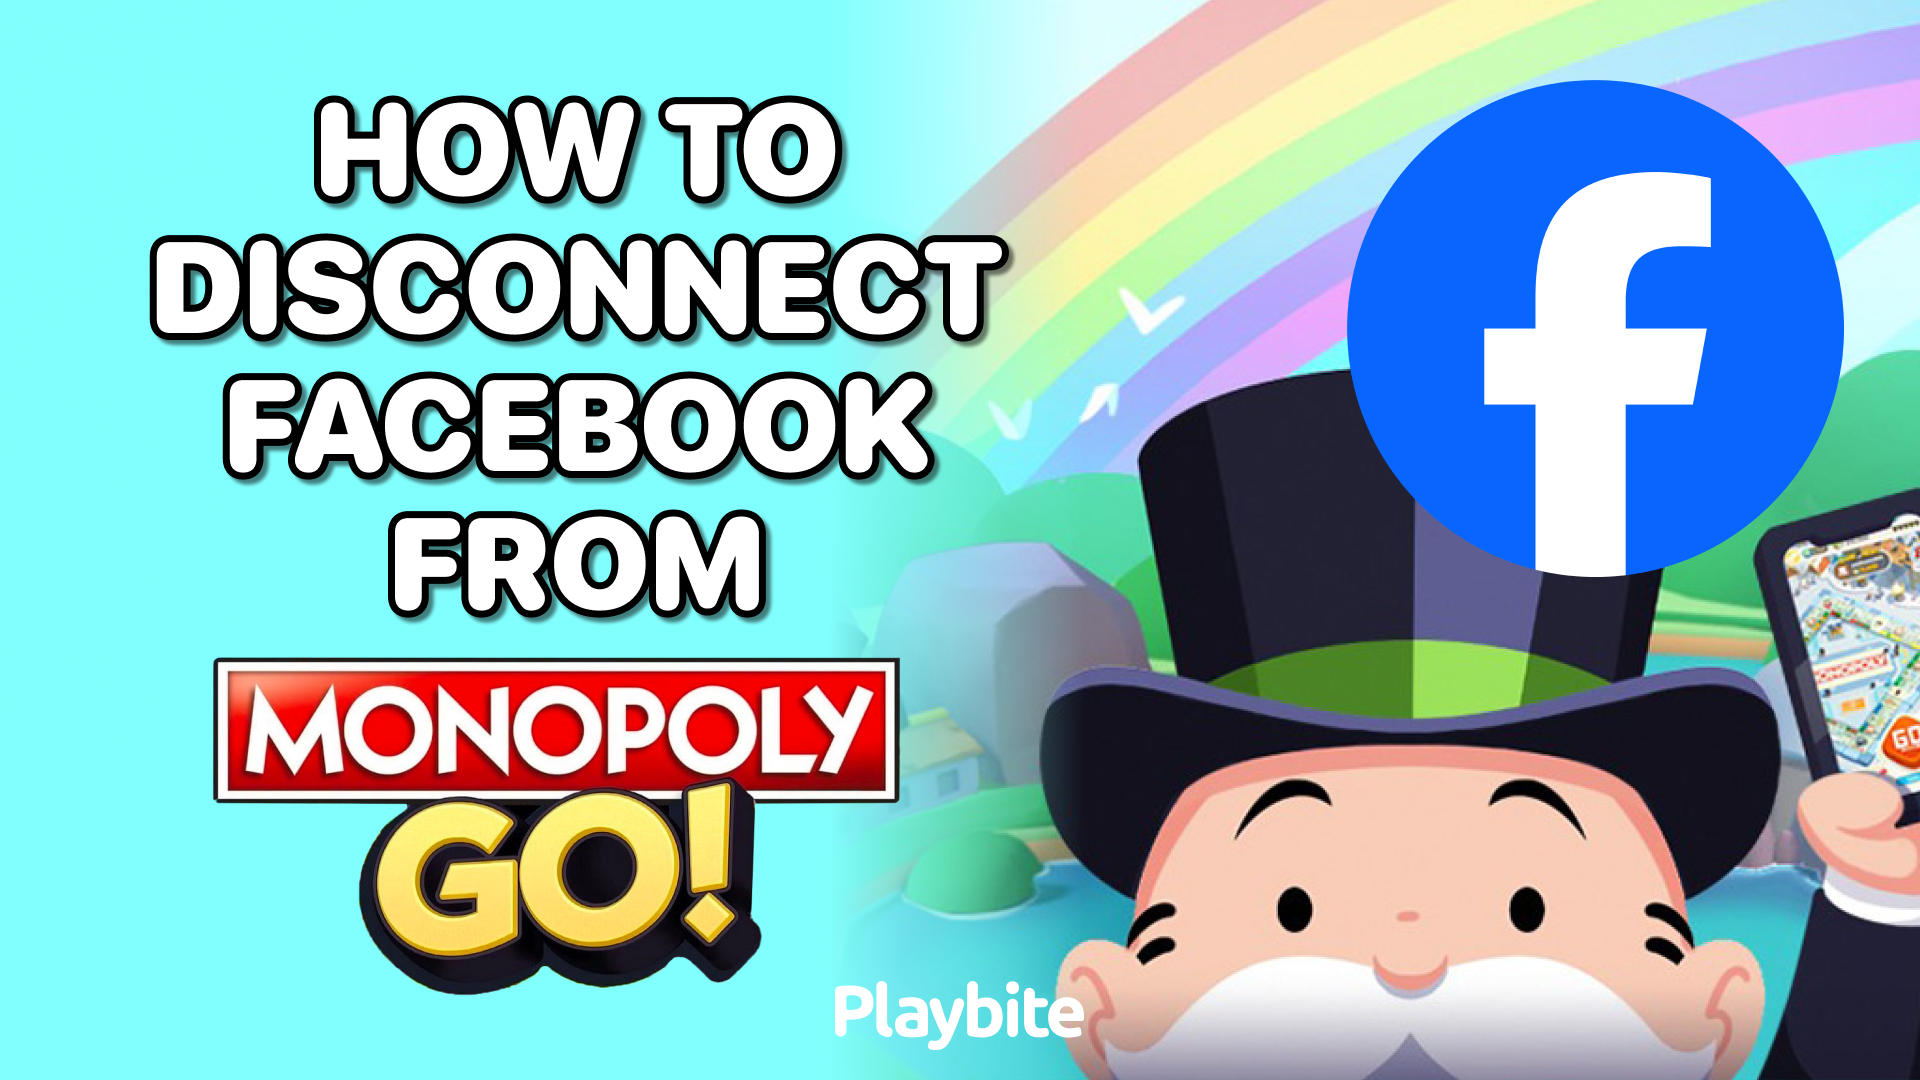 How to Disconnect Facebook from Monopoly Go: A Simple Guide